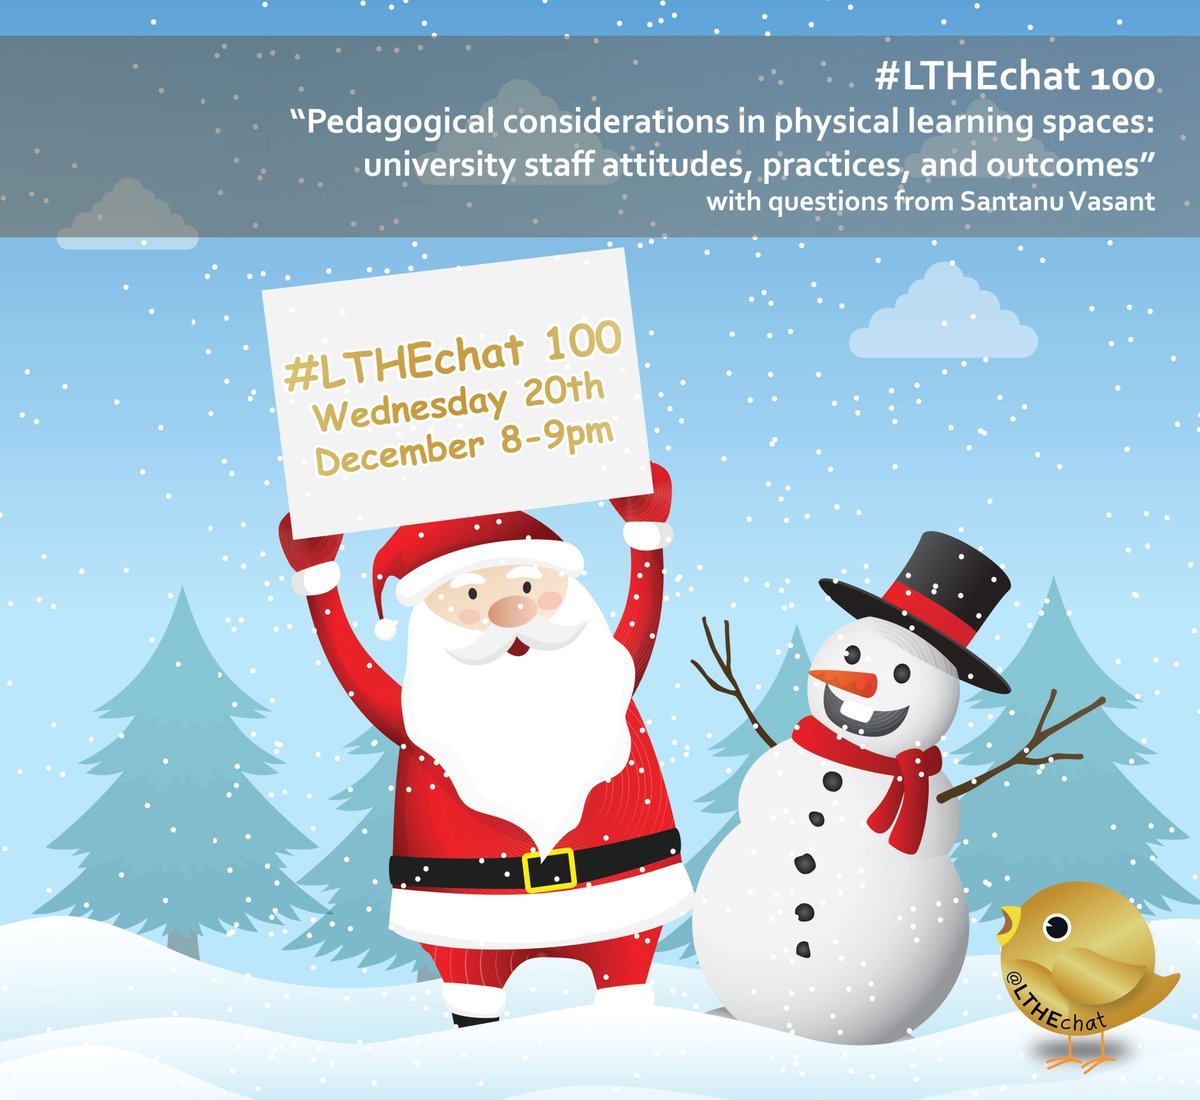 Sorry to hashtag hijack, but if the Tweeps of @SocMedHE #SocMedHE17 want to join the #100th @LTHEchat with me on #learningspaces, then make a date for 8 tomorrow #LTHEchat ! pls RT, like, tell a colleague back in the office ! 😀 https://t.co/iUJf4liUp0